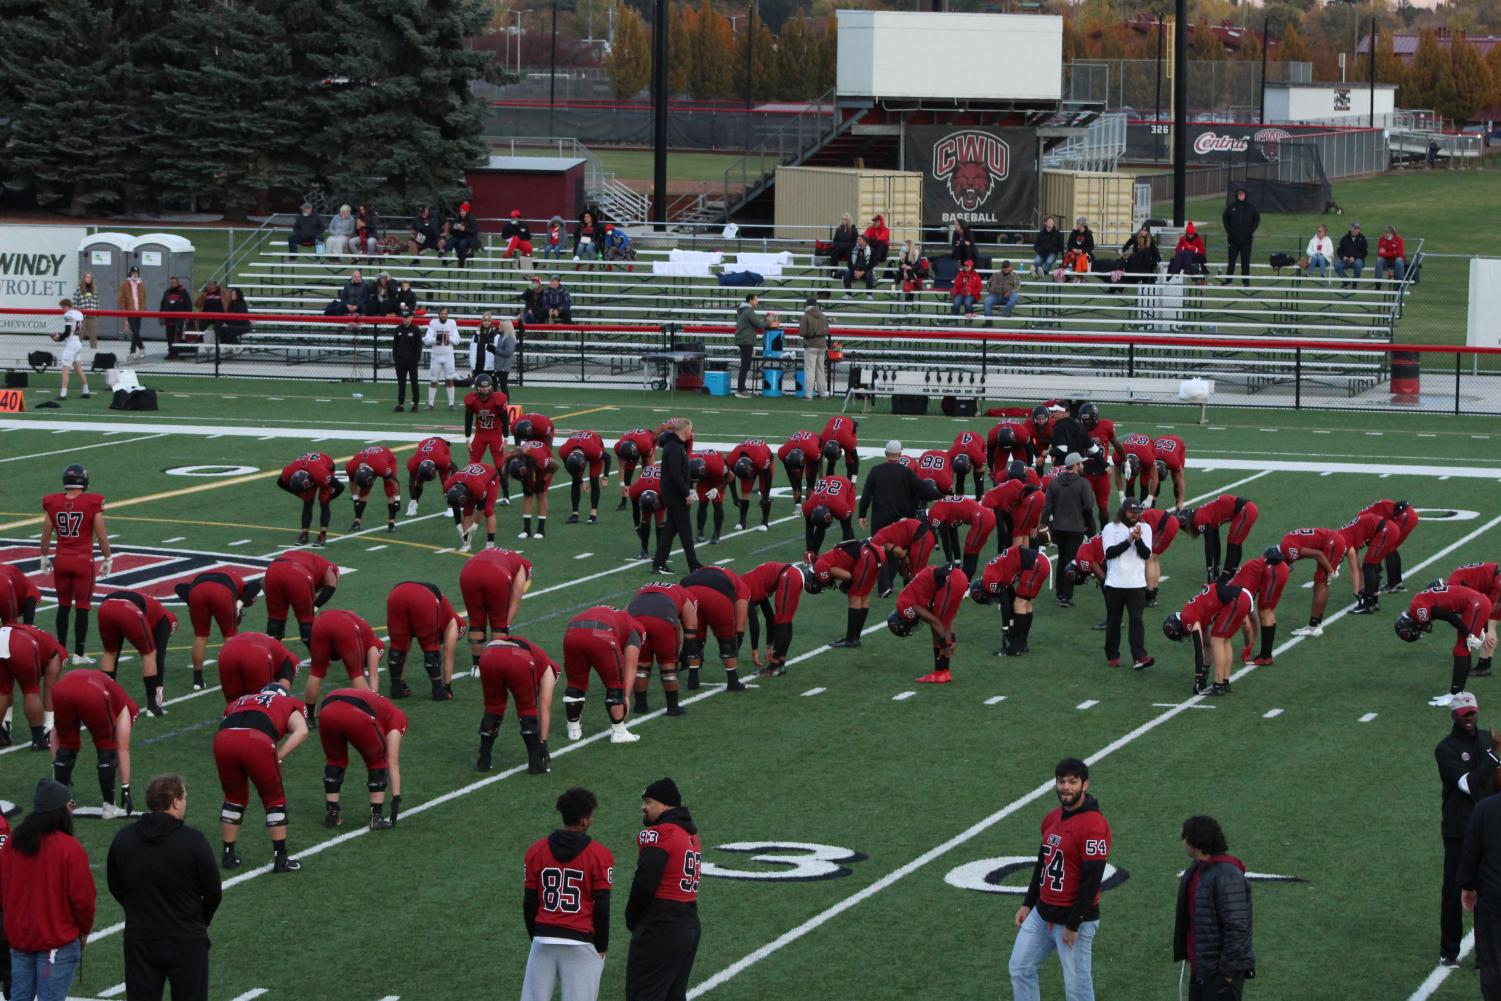 Wildcats+deliver+homecoming+win%2C+secure+fourth+straight+GNAC+championship